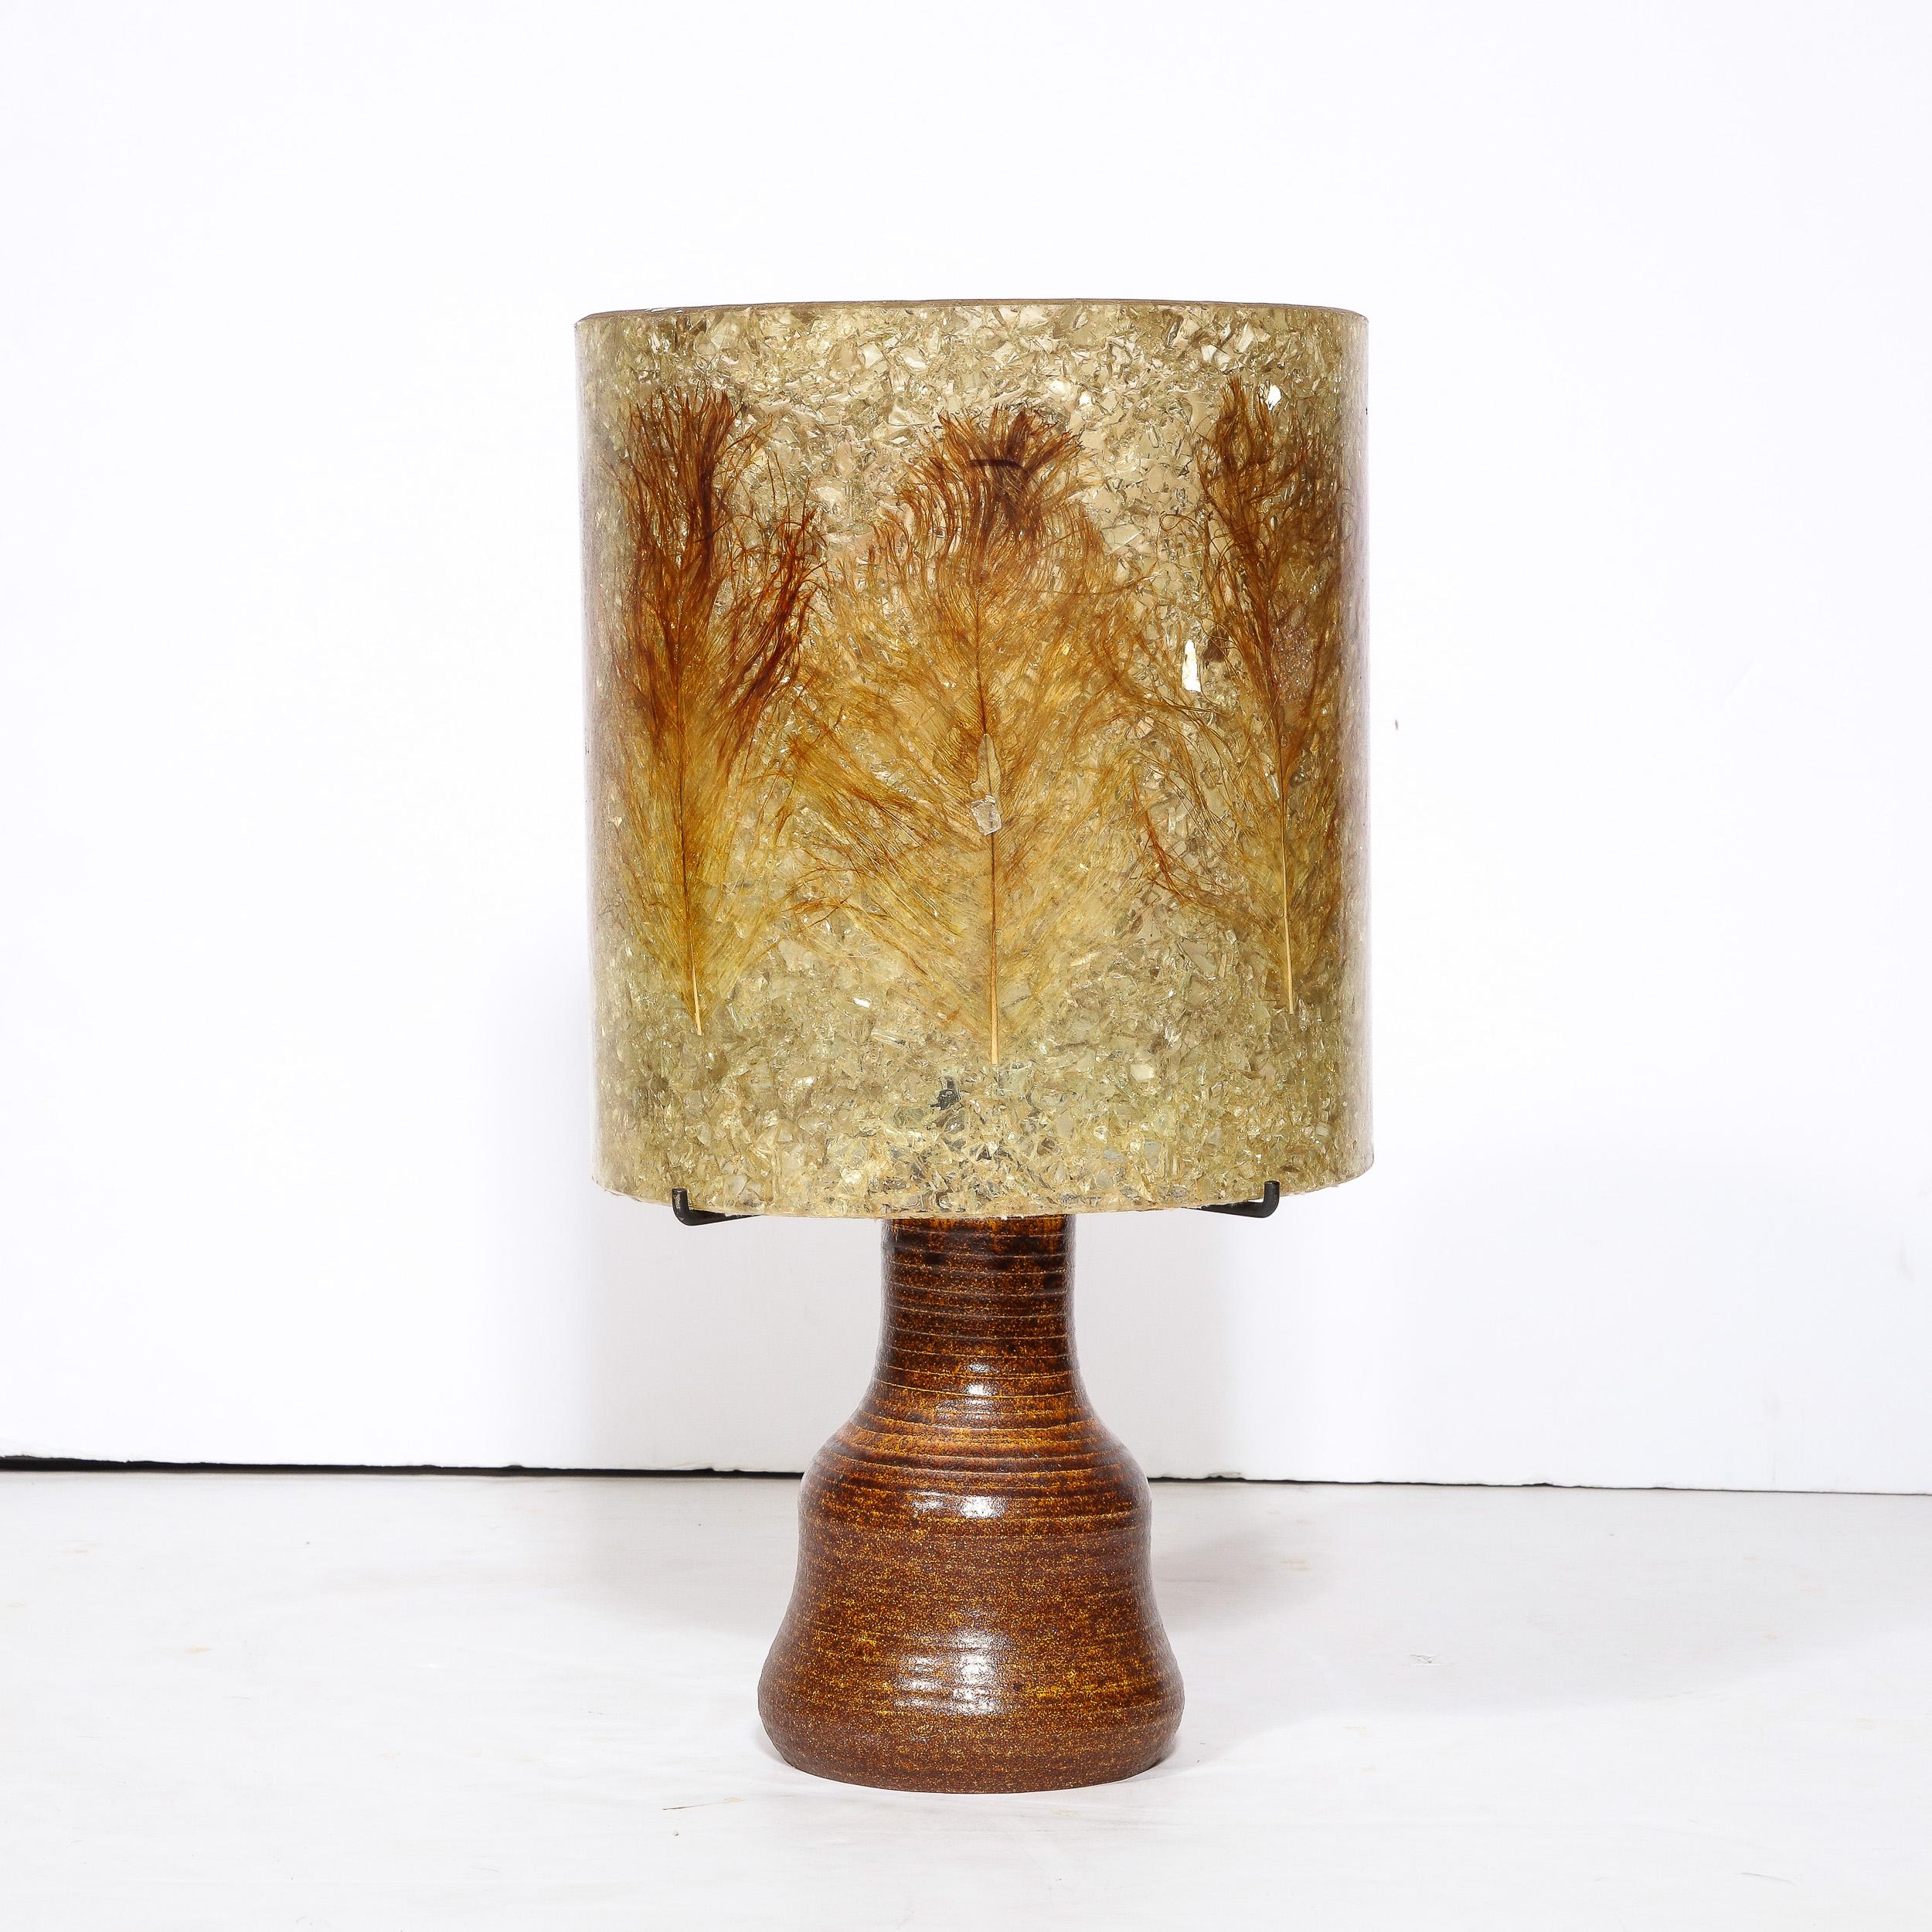 This sophisticated Mid-Century Modern table lamp was realized in France circa 1960. It features an sculptural undulating base in a rich iron oxide hue with subtle horizontal striations. The exquisite shade of the piece is composed of richly textured